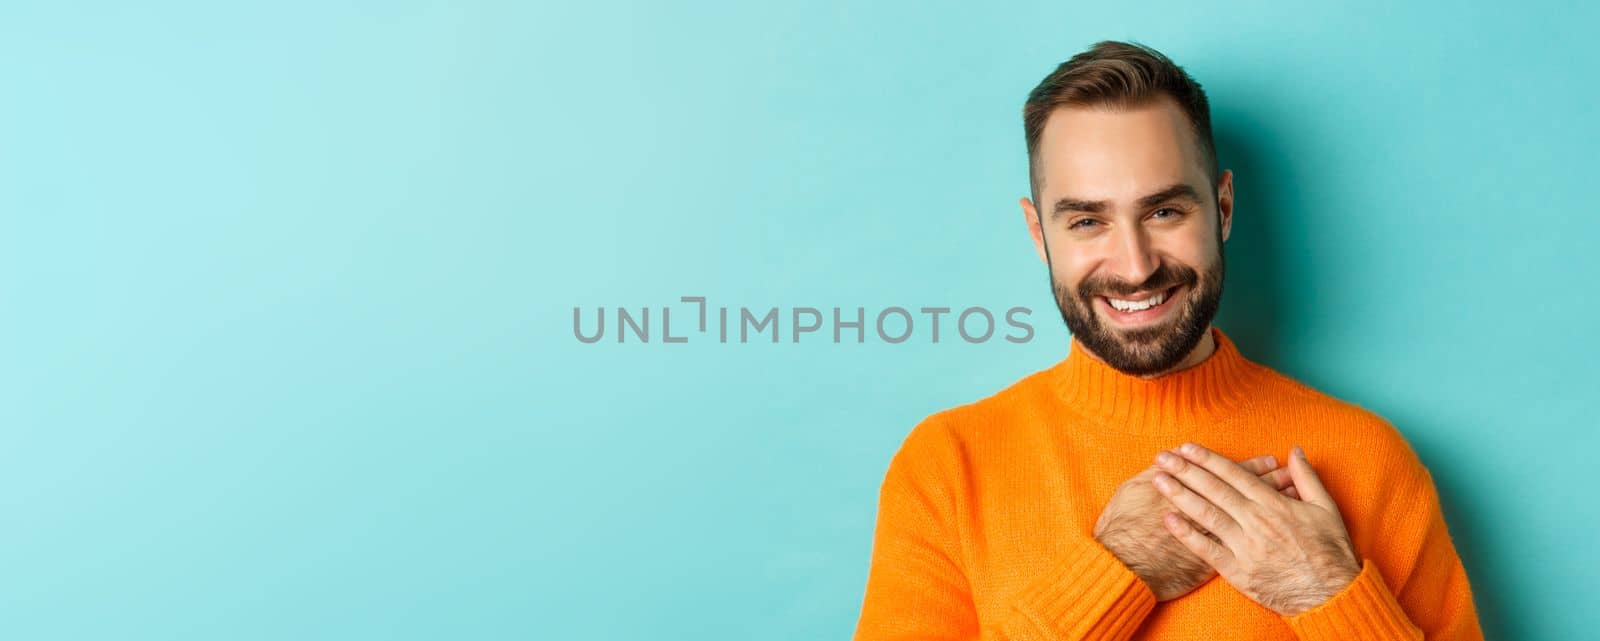 Close-up of handsome young man saying thank you, holding hands on heart and smiling grateful, standing over light blue background.